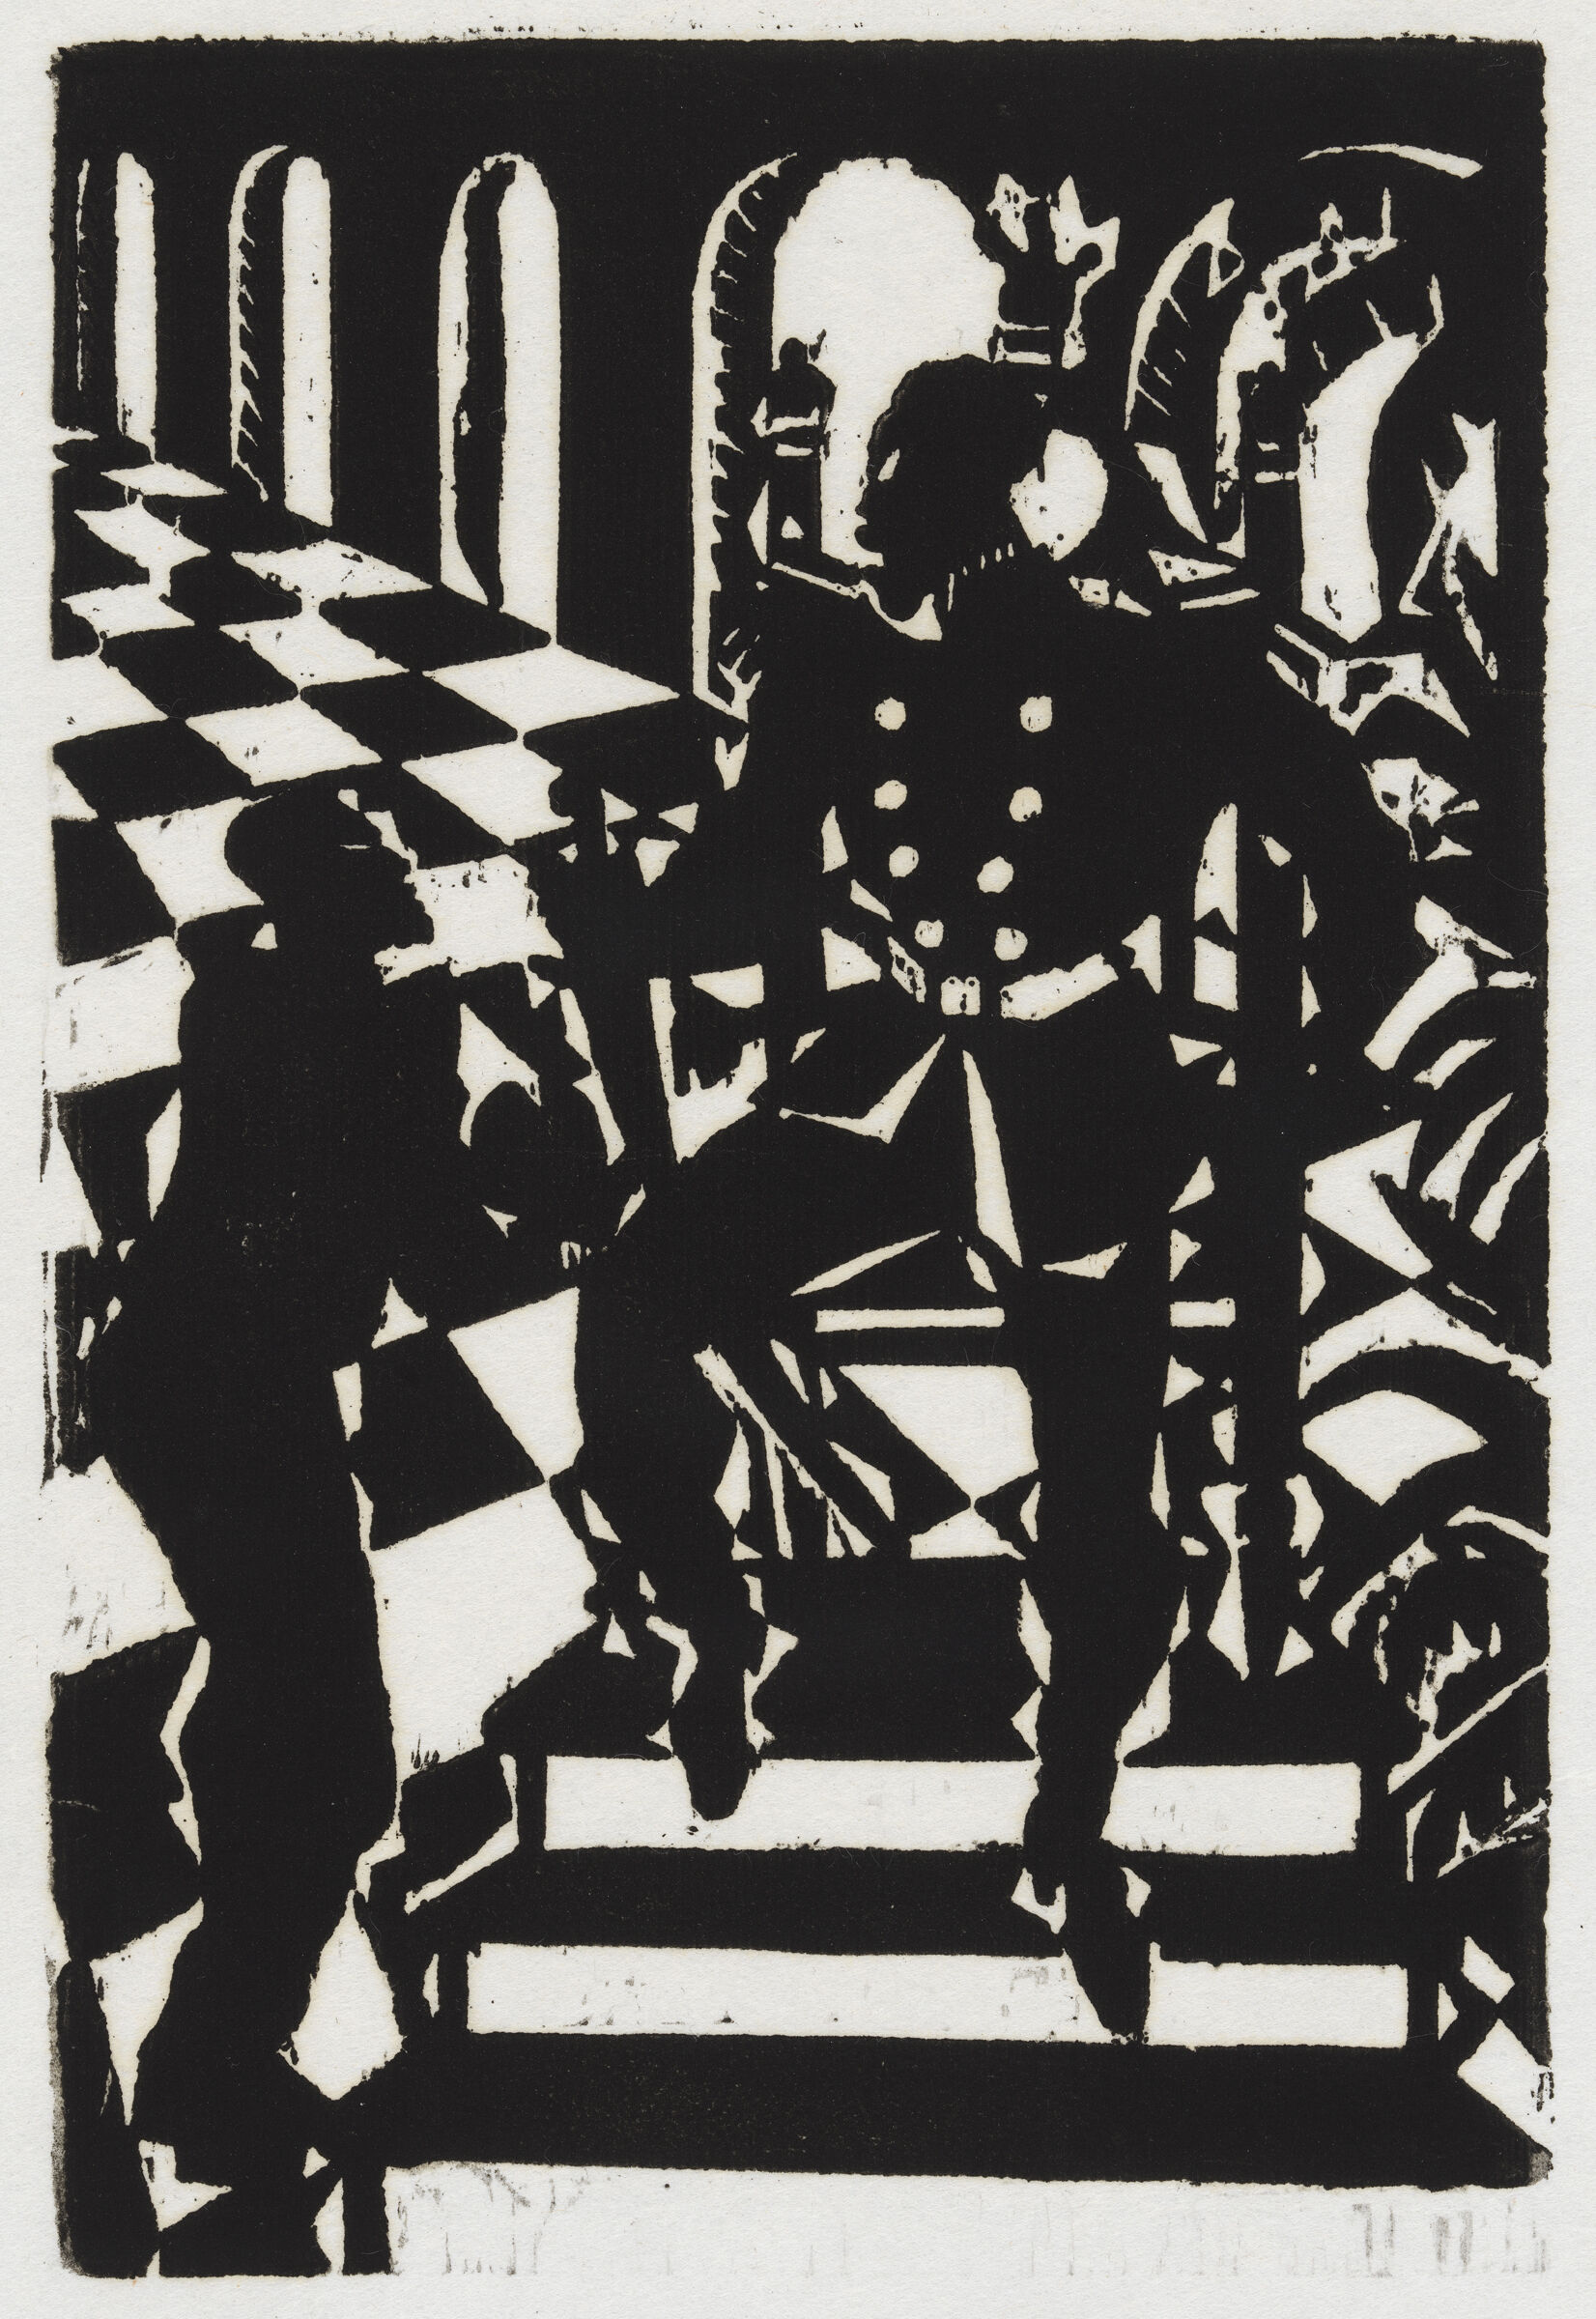 A black and white print of a seated figure on a raised platform interacting with an approaching figure on the steps below.